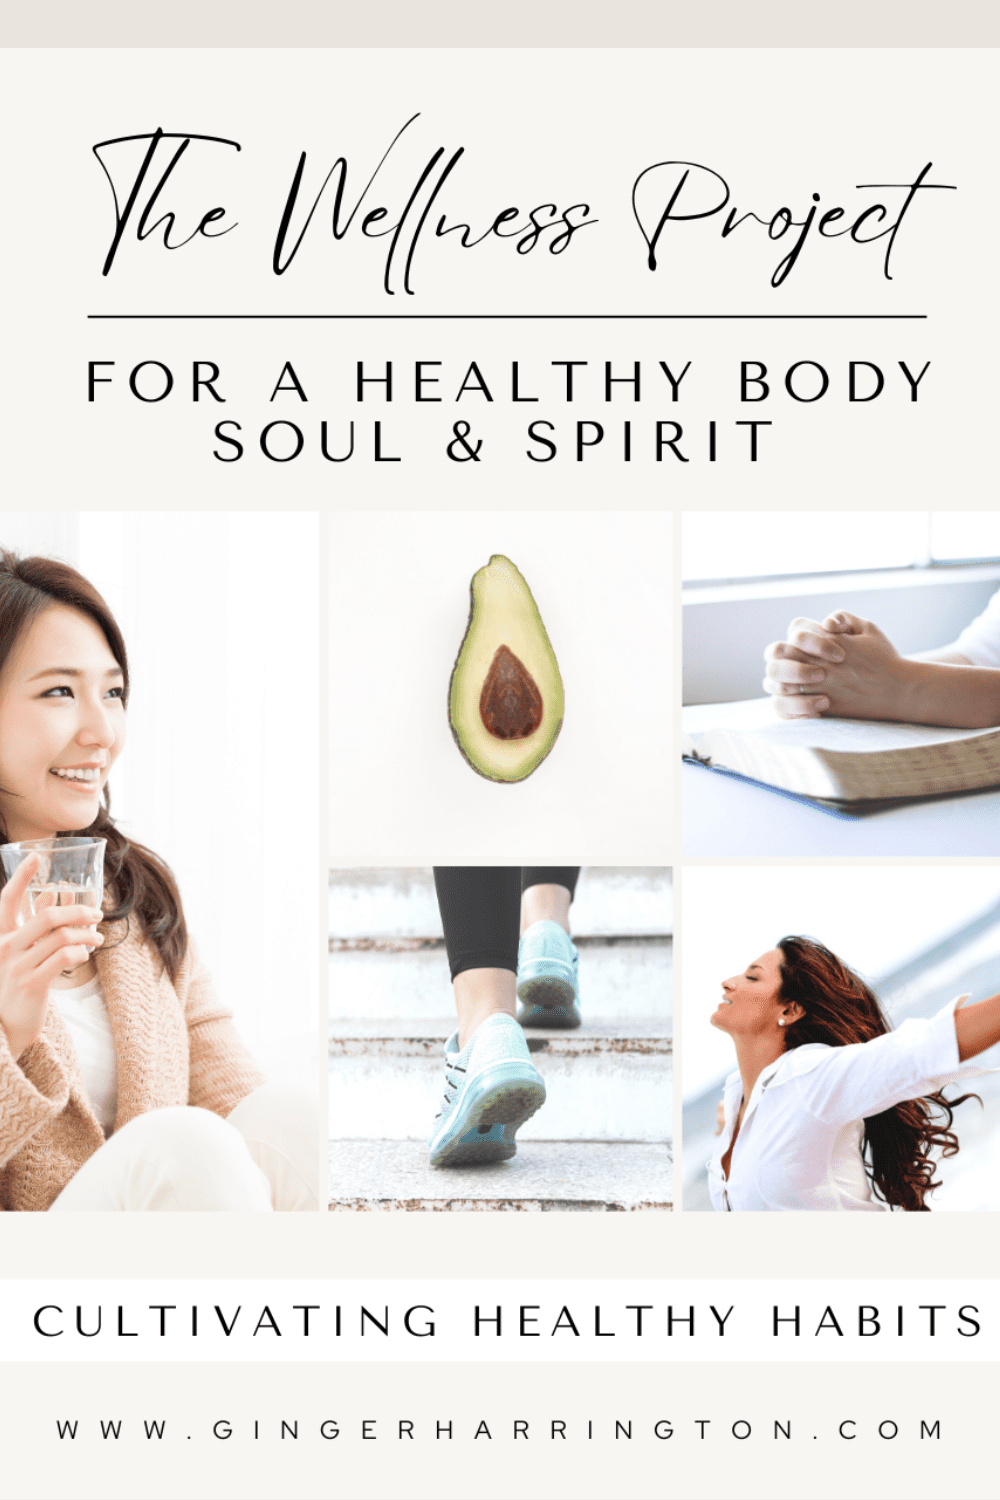 Woman drinking water, feet walking, hands in prayer demonstrate good habits for healthy living.